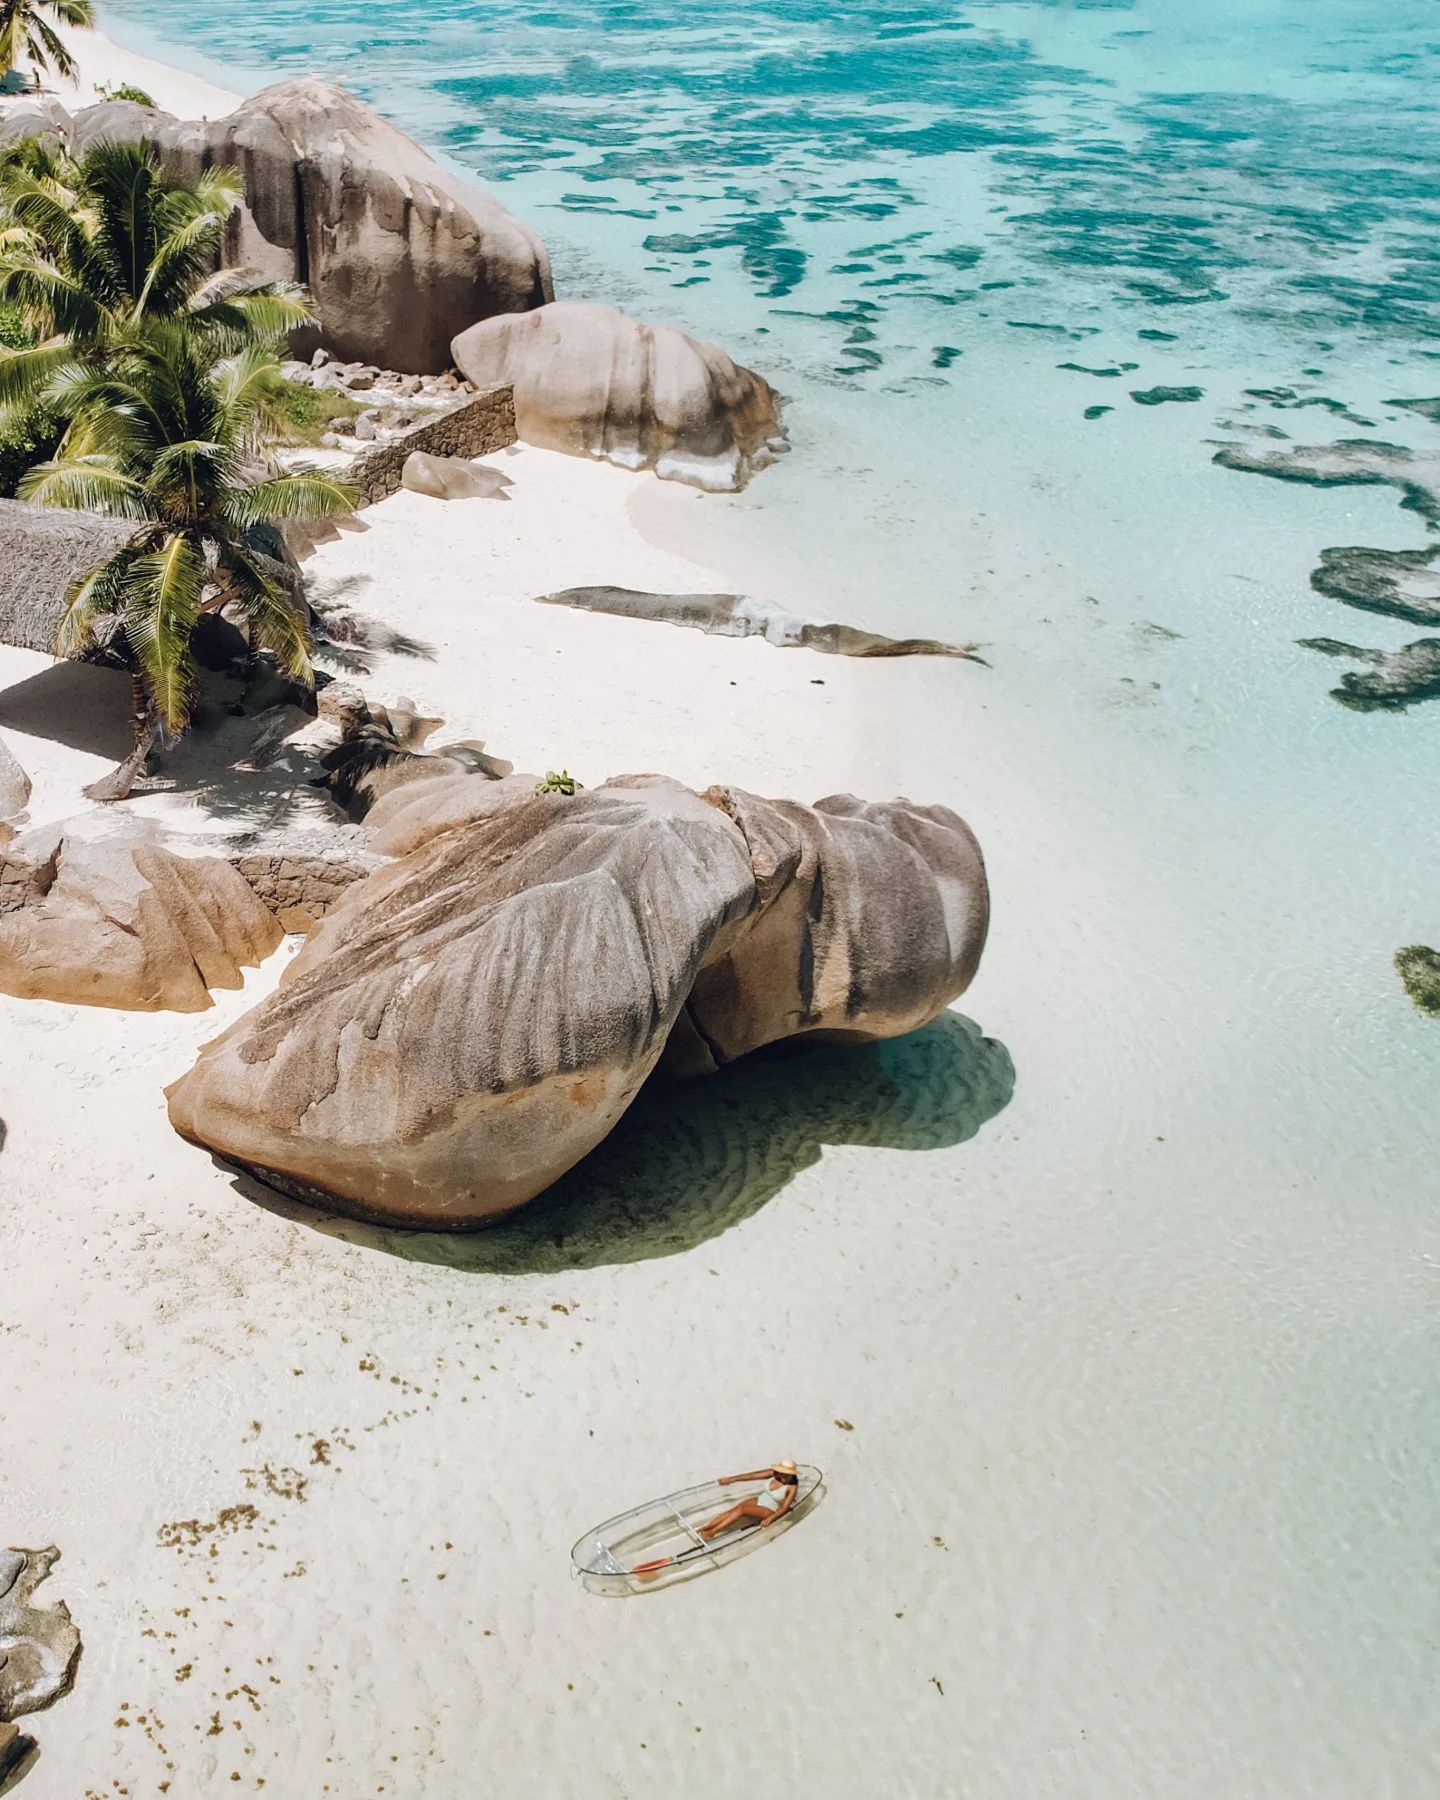 La Digue was my favourite of 3 Seychelles Islands I visited. Why? It was small enough to walk around in, there are more bikes than vehicles, it has beautiful hiking trails and of course, gorgeous beaches. These were my favourites in order of my preferences:⁣
⁣
- Anse Patates⁣
- Anse Cocos⁣
- Anse Source D'argent⁣
- Anse Pierrot⁣
- Grand Anse⁣
- Anse Severe⁣
- Petite Anse⁣
- Anse Songe⁣
- Grand L'anse⁣
⁣
Many people visit La Digue as a day trip from other islands. I definitely think it's worth spending a full day or two on the island.⁣
⁣
On my blog, I will be sharing my 3-day itinerary and recommendations on how to spend your time in La Digue. If you'd like any specific information, please leave them in the comments and I'll include it in upcoming posts. 💙